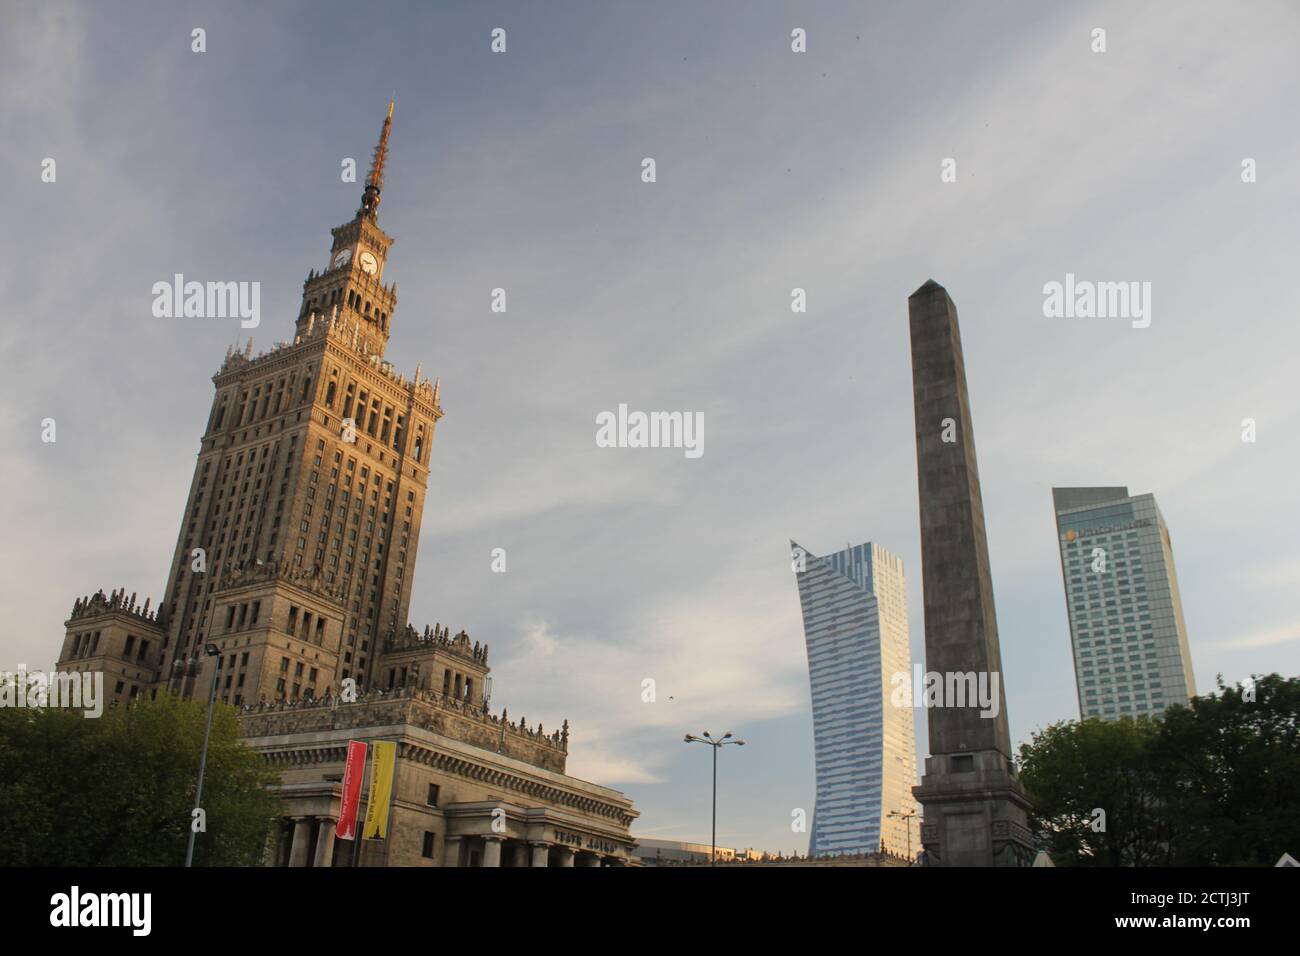 Palace of culture and science in Warsaw , Poland Stock Photo